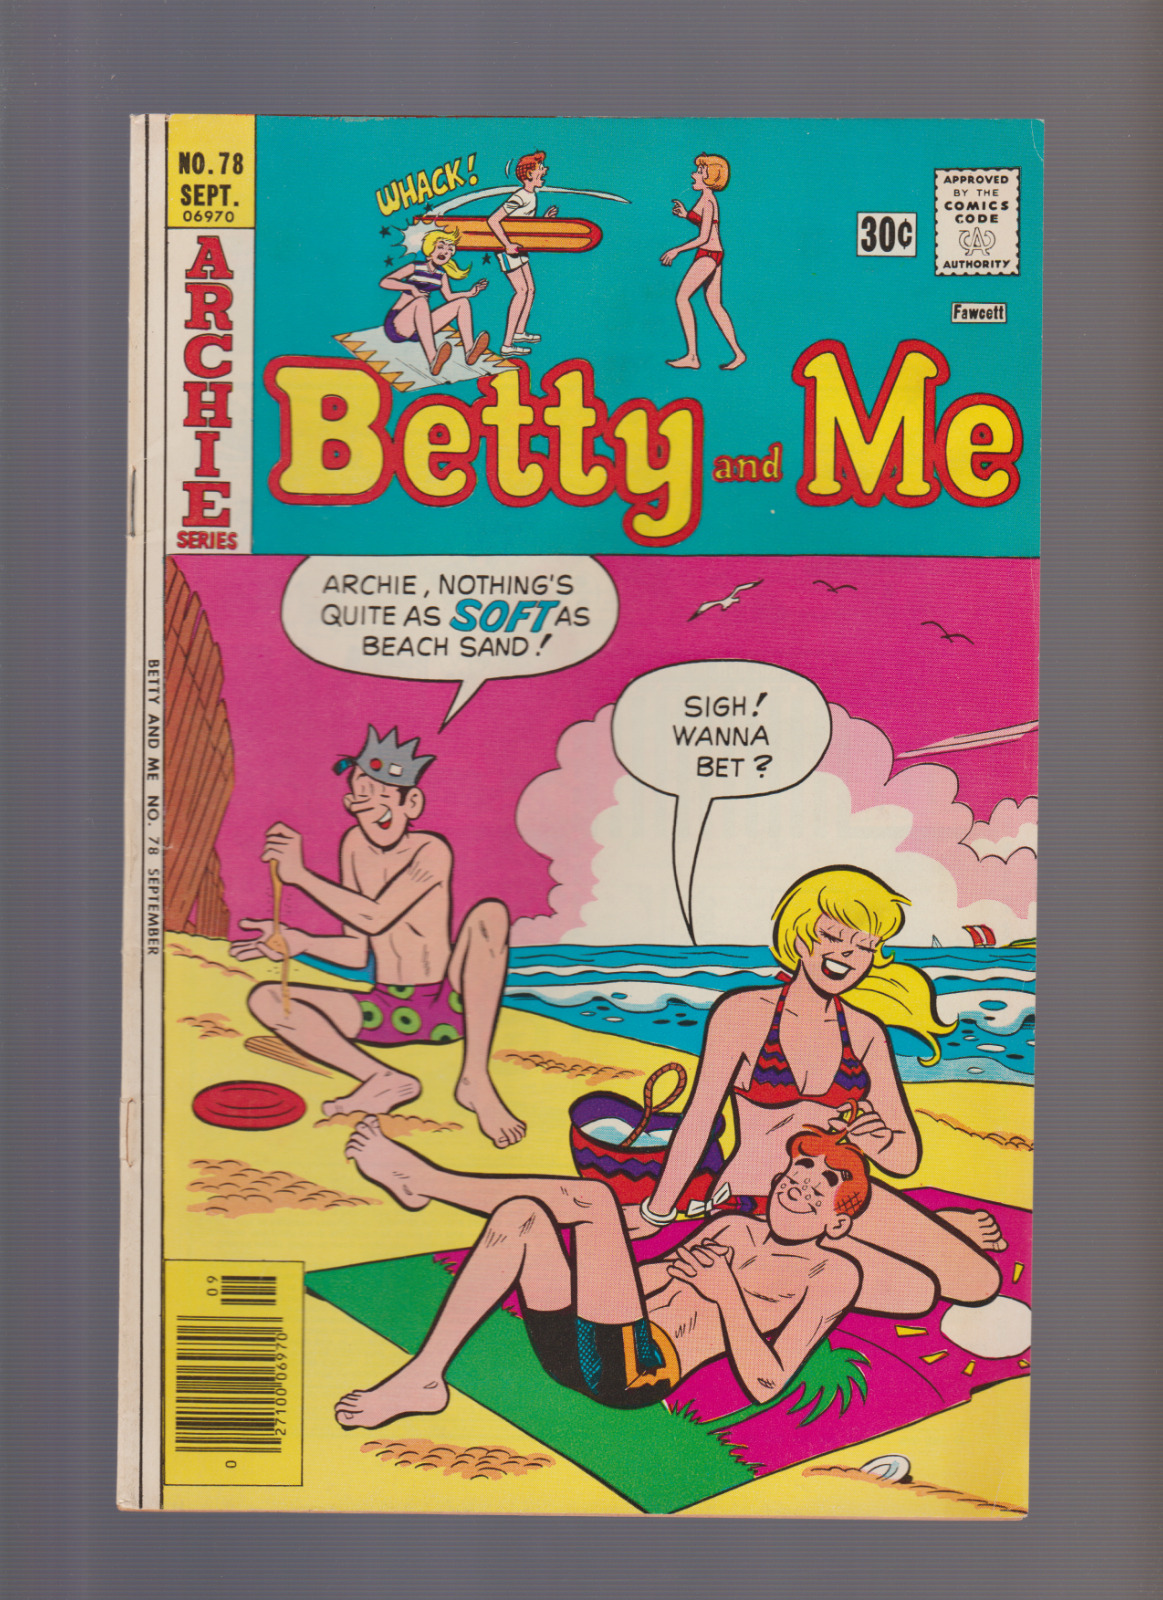 Archie BETTY AND ME #78 (1976) Sexual Innuendo \